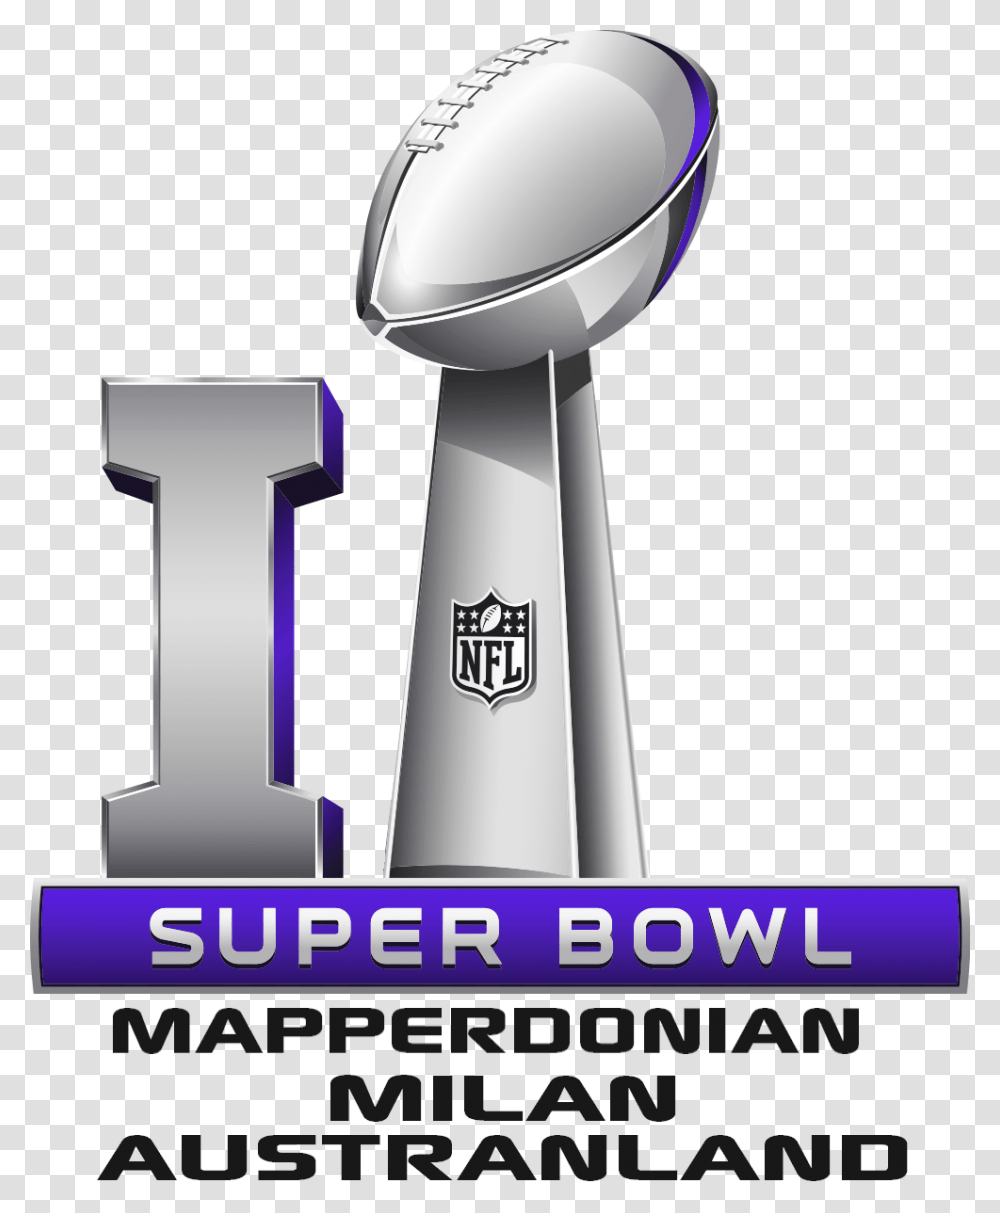 Thefutureofeuropes Wiki Super Bowl, Trophy, Word, Sink Faucet, Control Tower Transparent Png